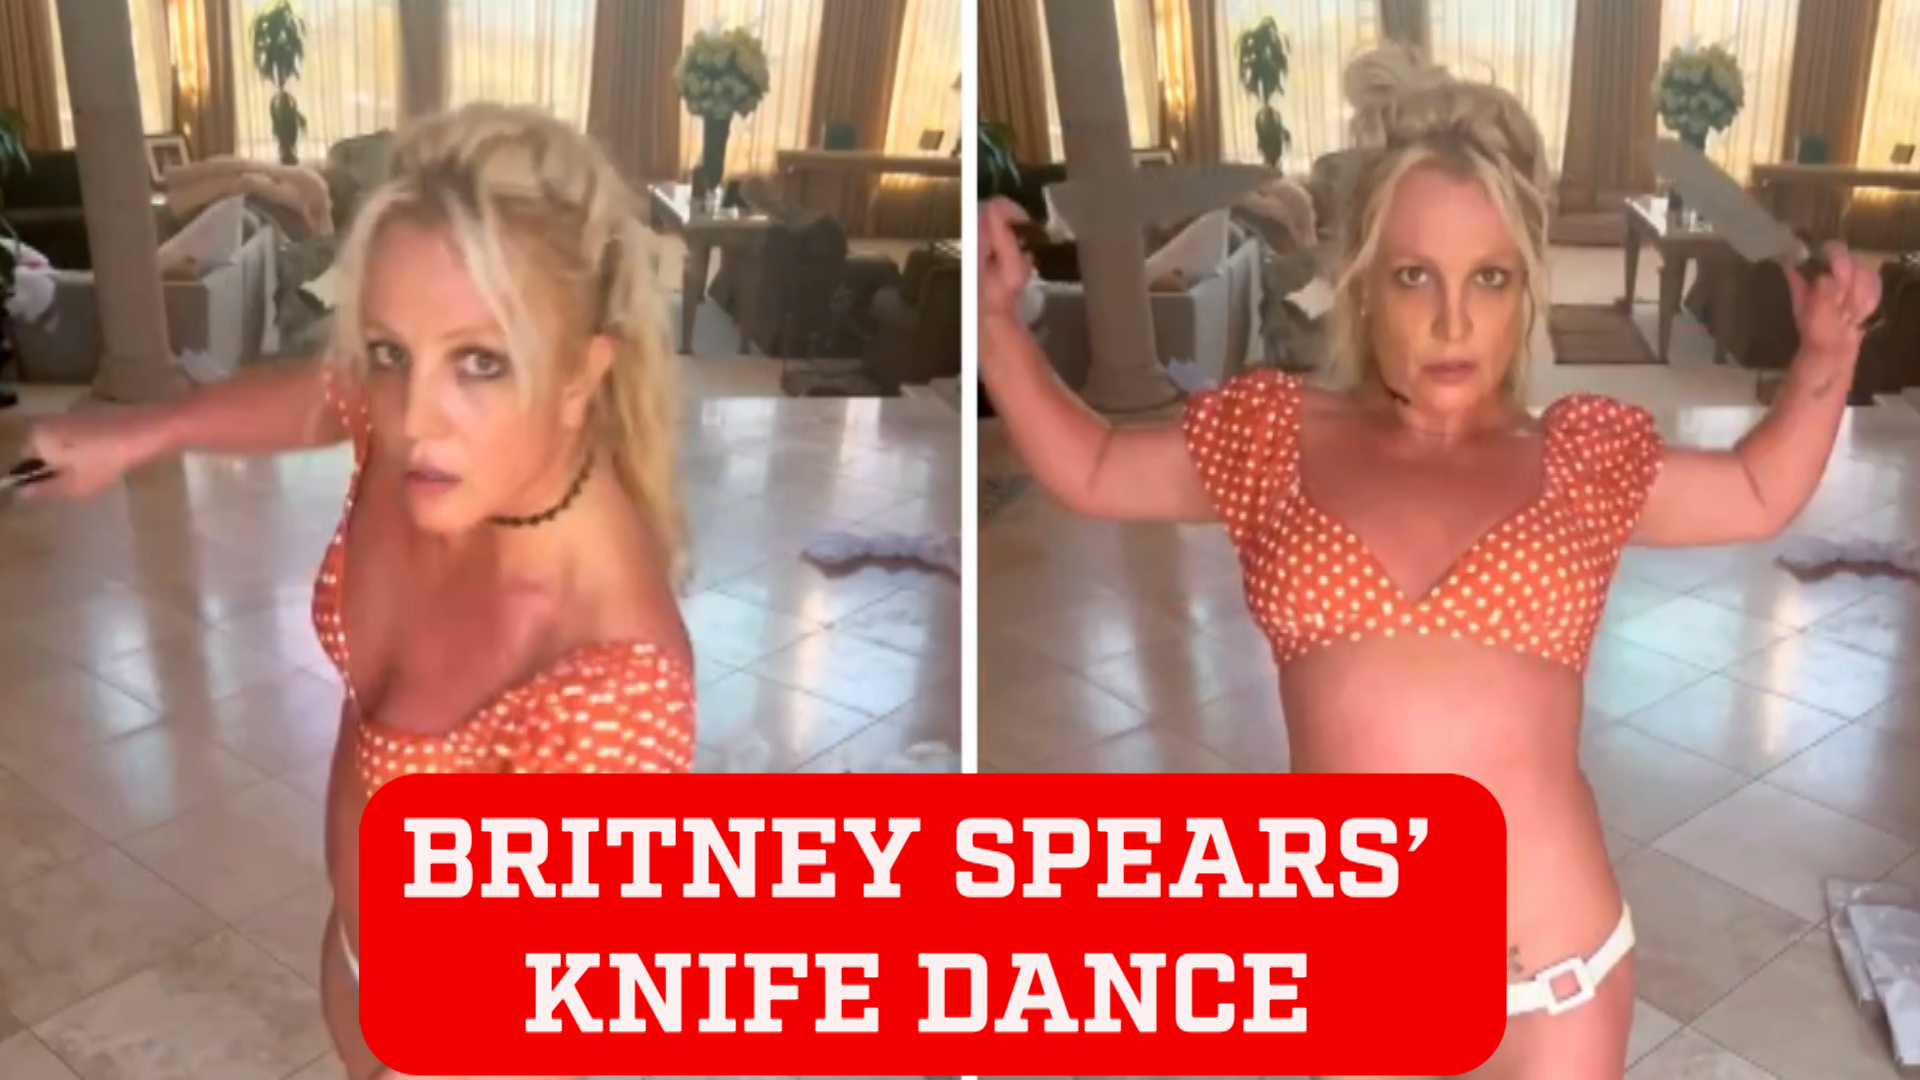 Britney Spears  tells everyone to 'lighten up' about her knives video, says she was 'copying Shakira'